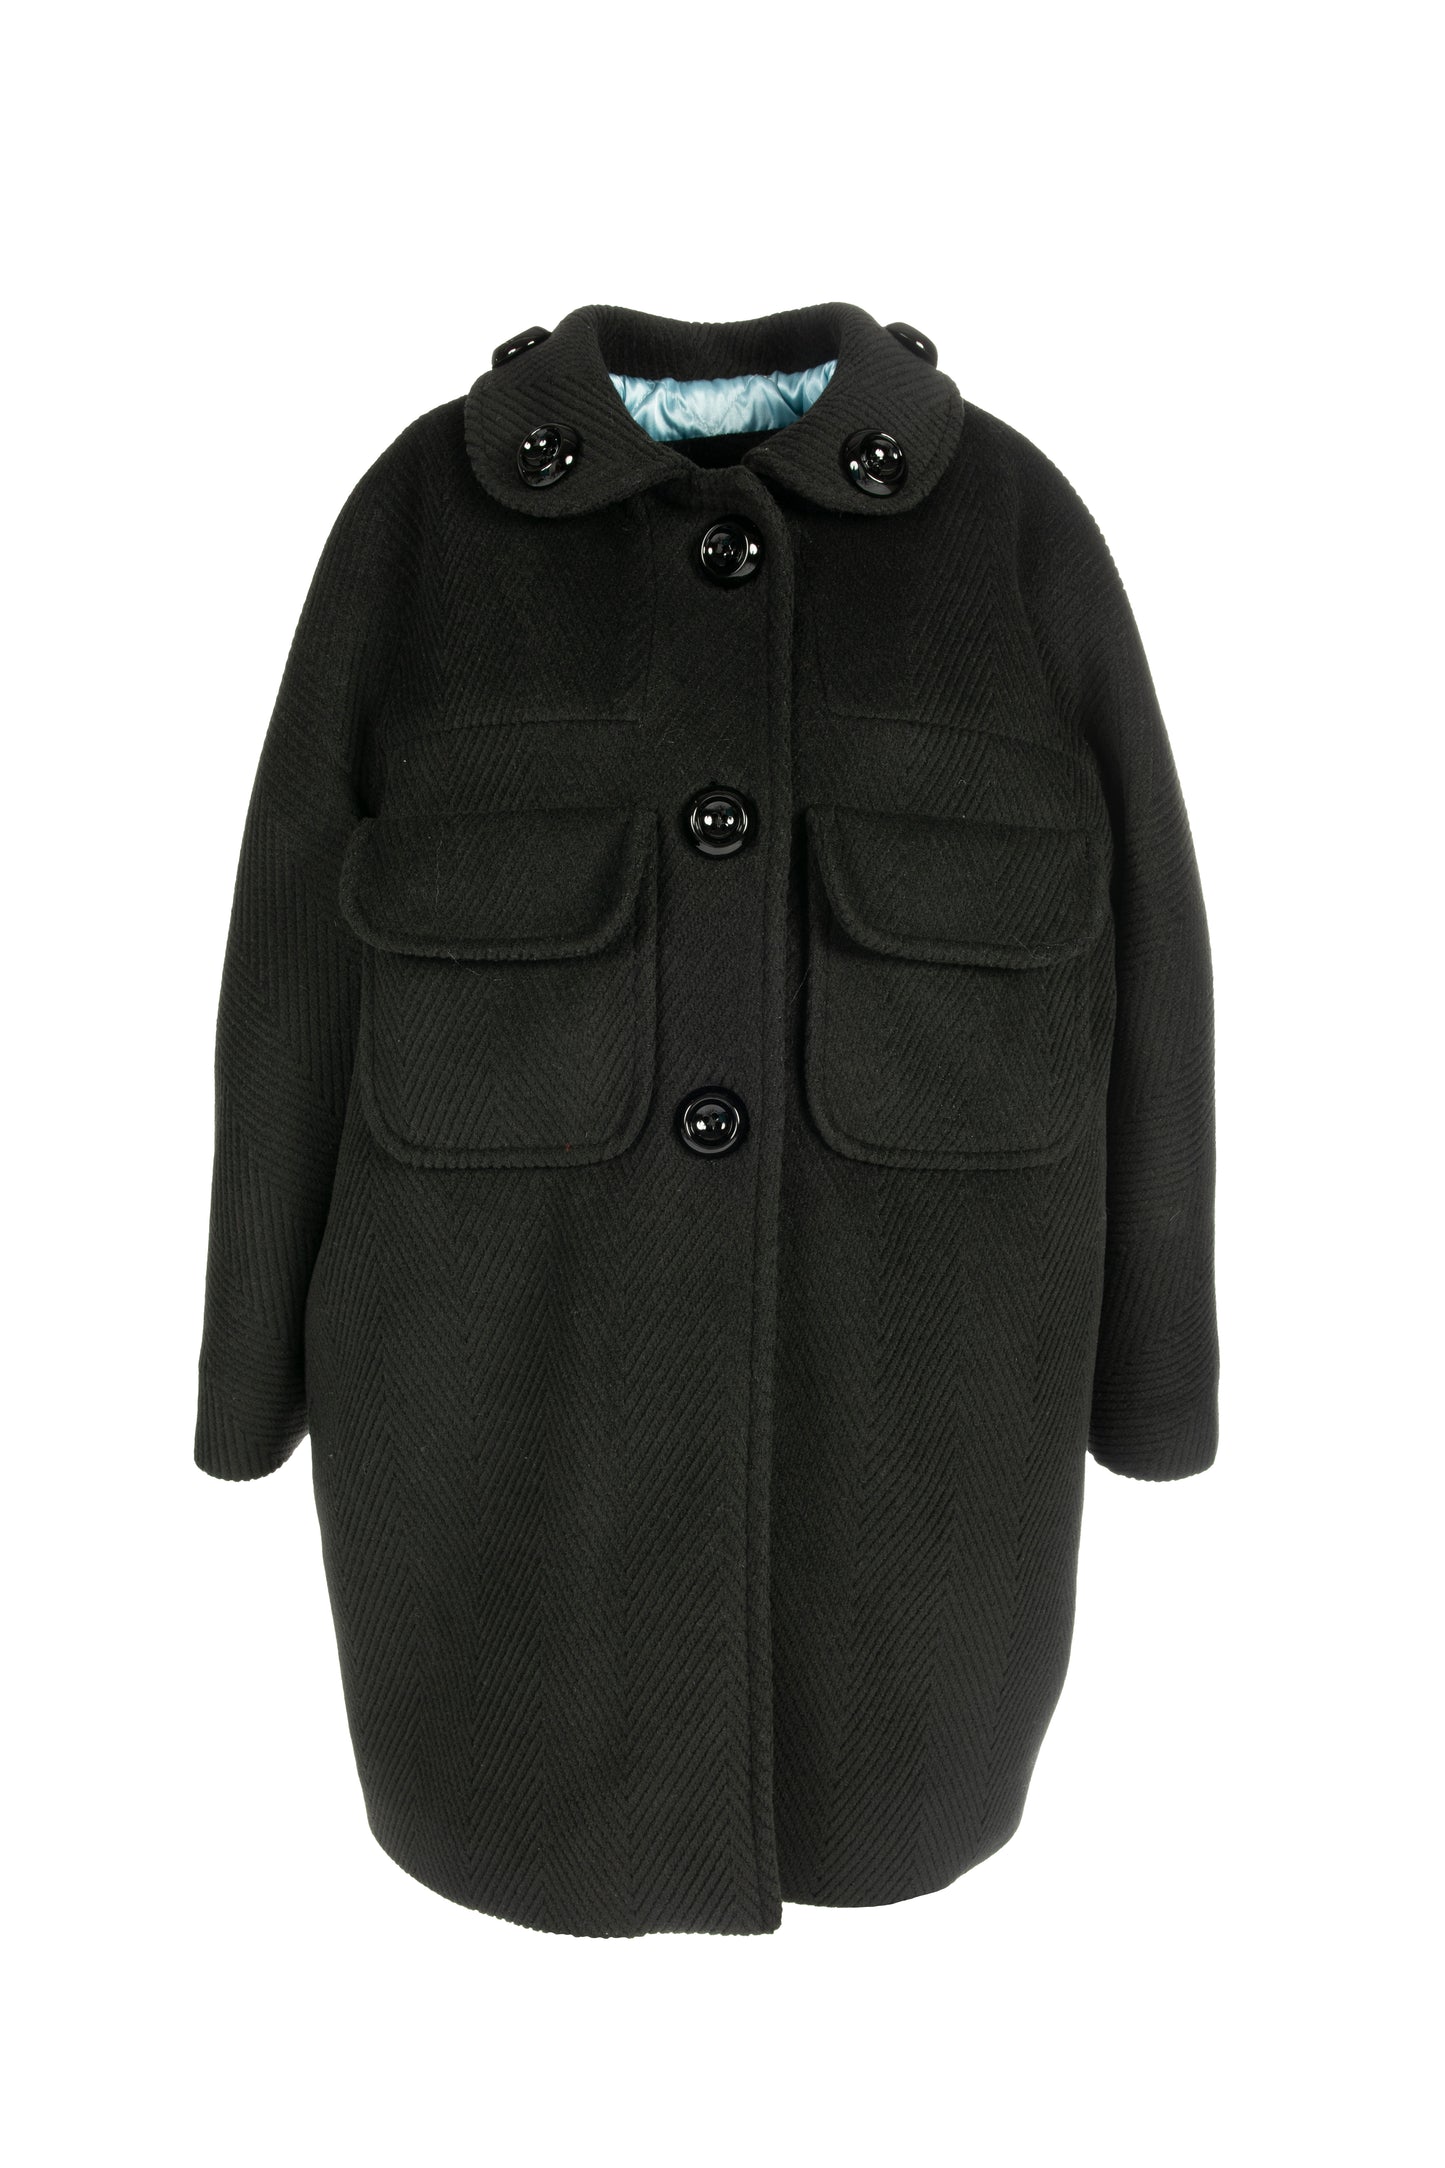 Cloth coat with decorative buttons